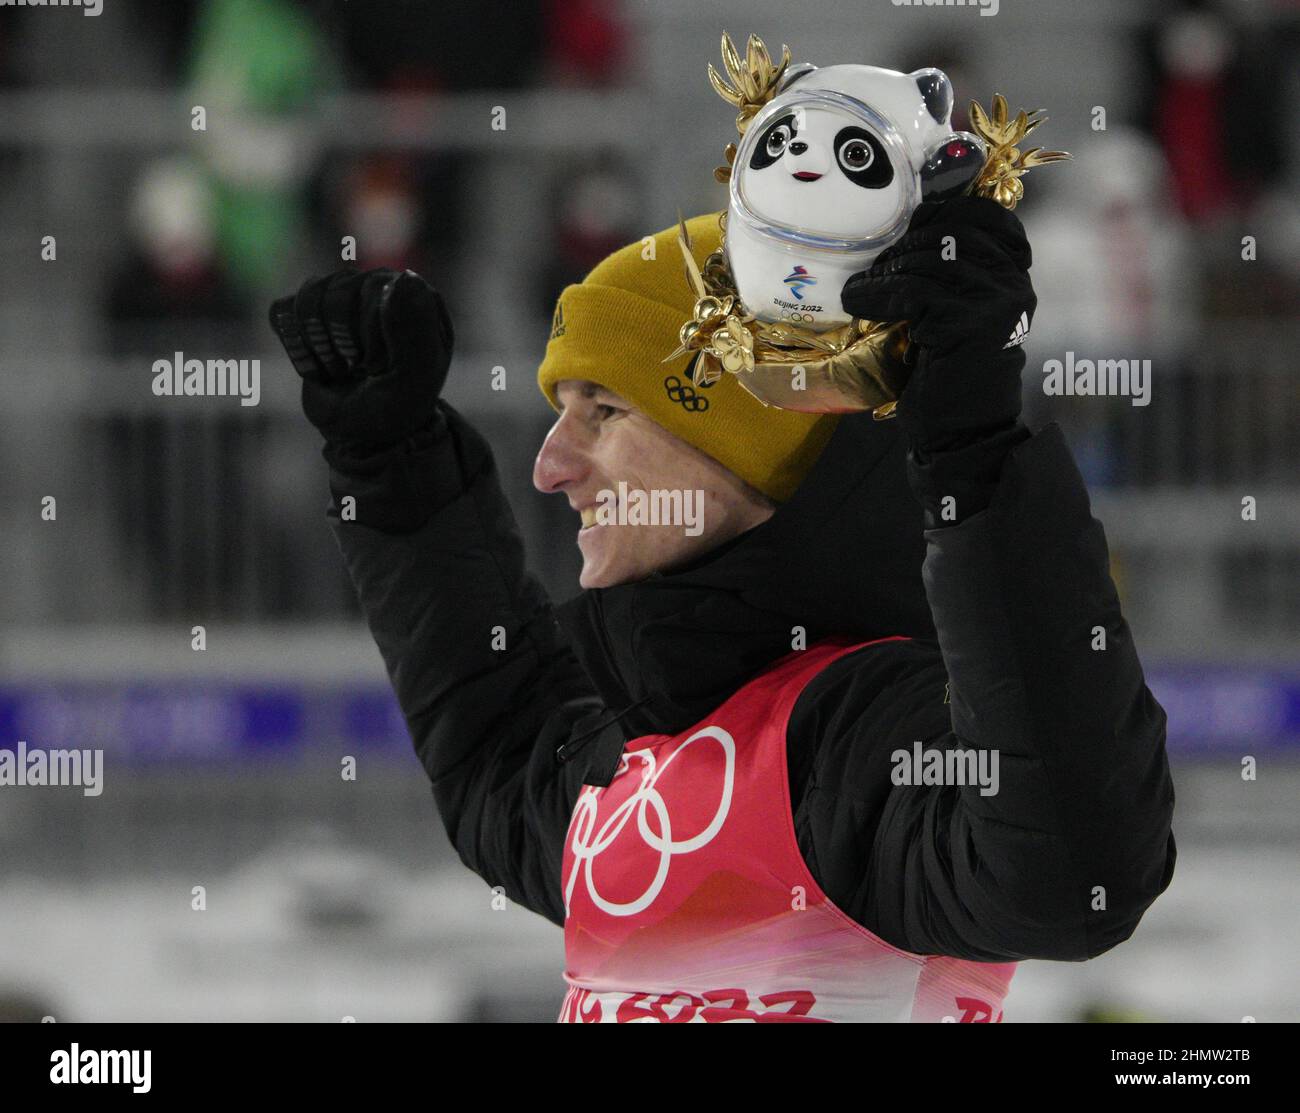 Zhangjiakou, China. 12th Feb, 2022. Bronze medalist Karl Geiger of Germany waves after the Men's Ski Jumping Individual Large Hill finals at the 2022 Winter Olympics in Zhangjiakou, China on Saturday, February 12, 2022. Norway's Marius Lindvik won the gold medal and Japan's Ryoyu Kobayashi won the silver medal. Photo by Bob Strong/UPI Credit: UPI/Alamy Live News Stock Photo